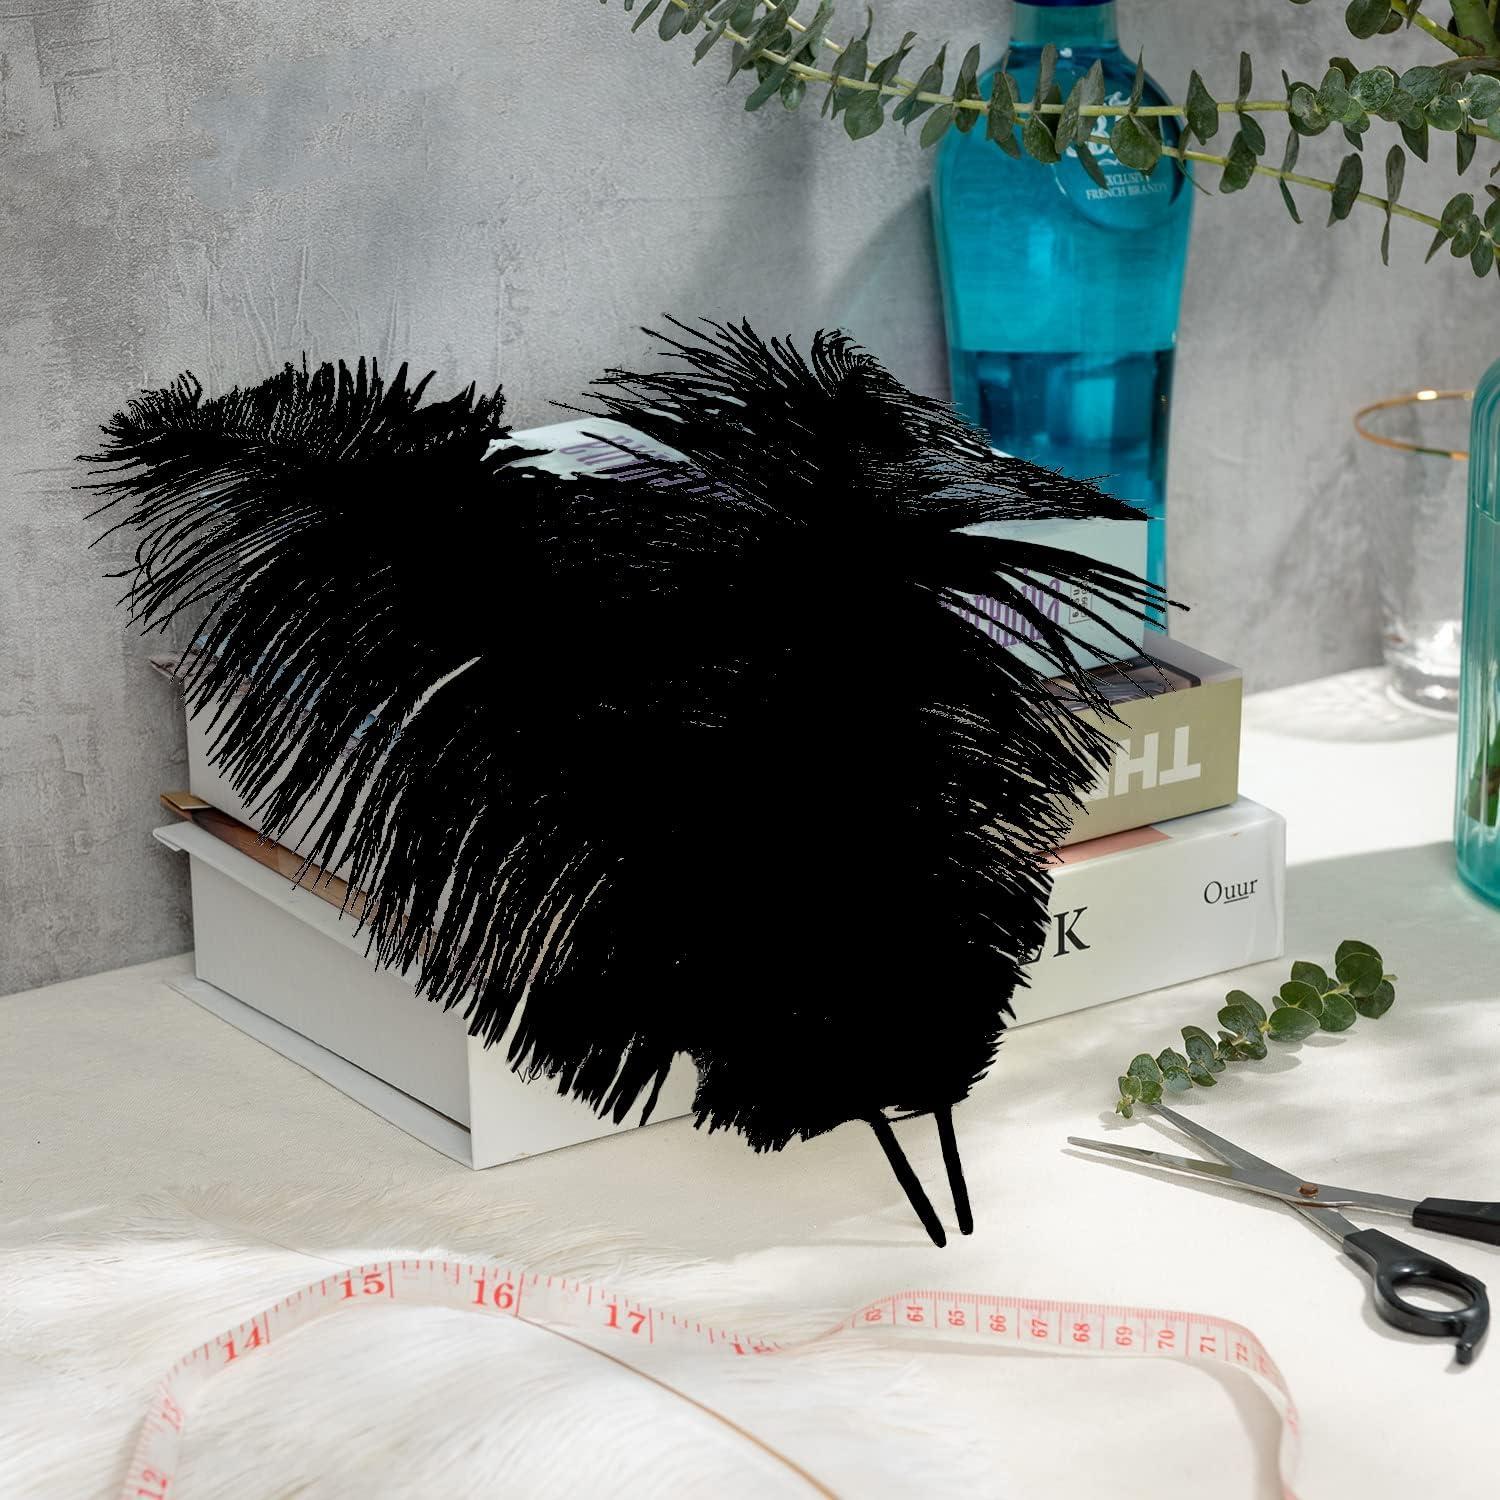 10/20pcs Large Ostrich Feathers for Dinner Vase Wedding Party